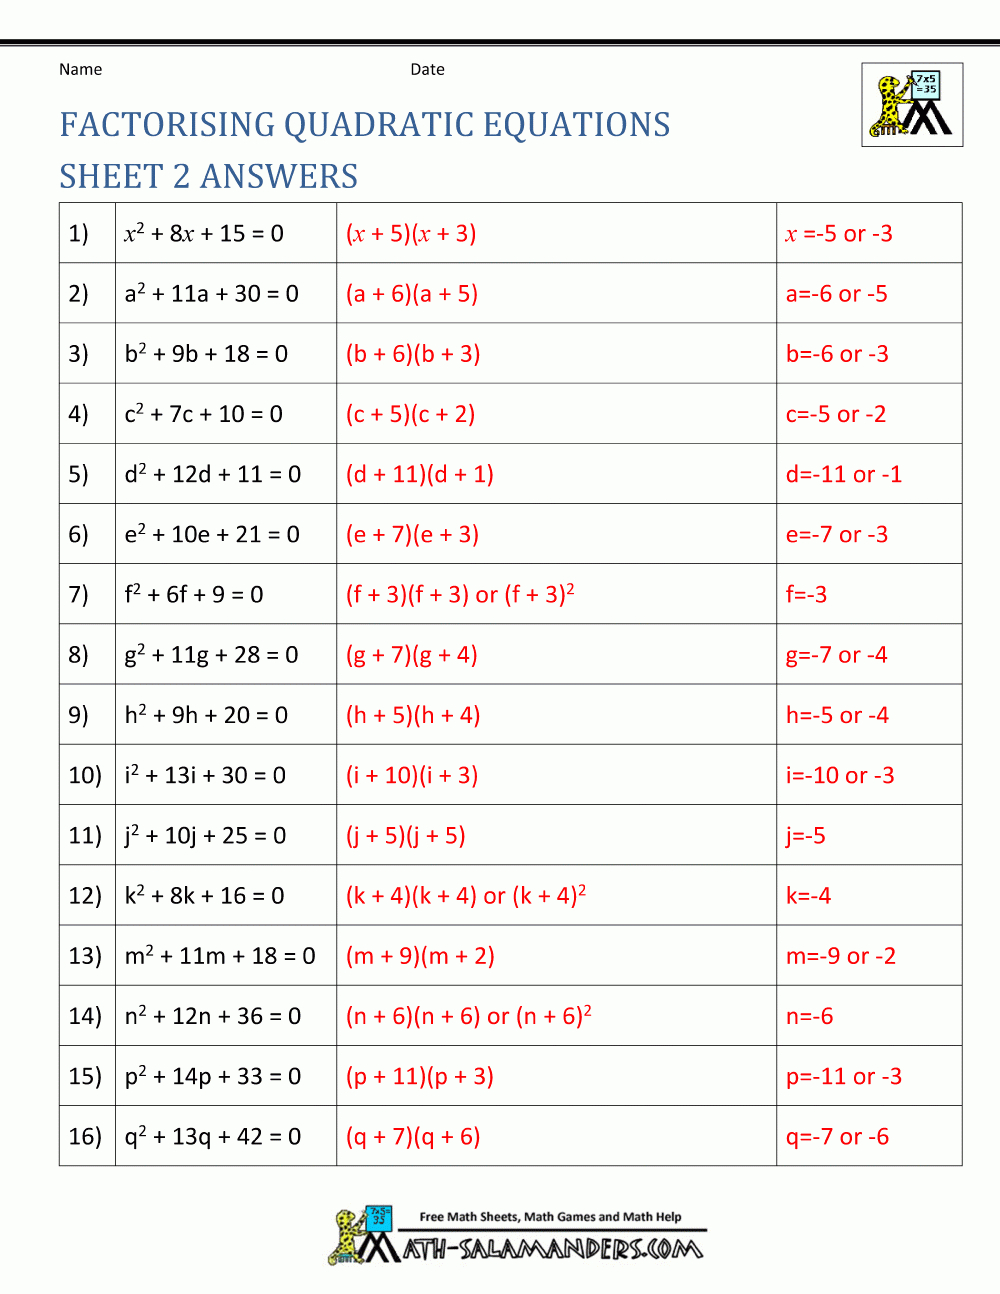 Factoring Quadratic Equations As Well As Factoring X2 Bx C Worksheet Answers